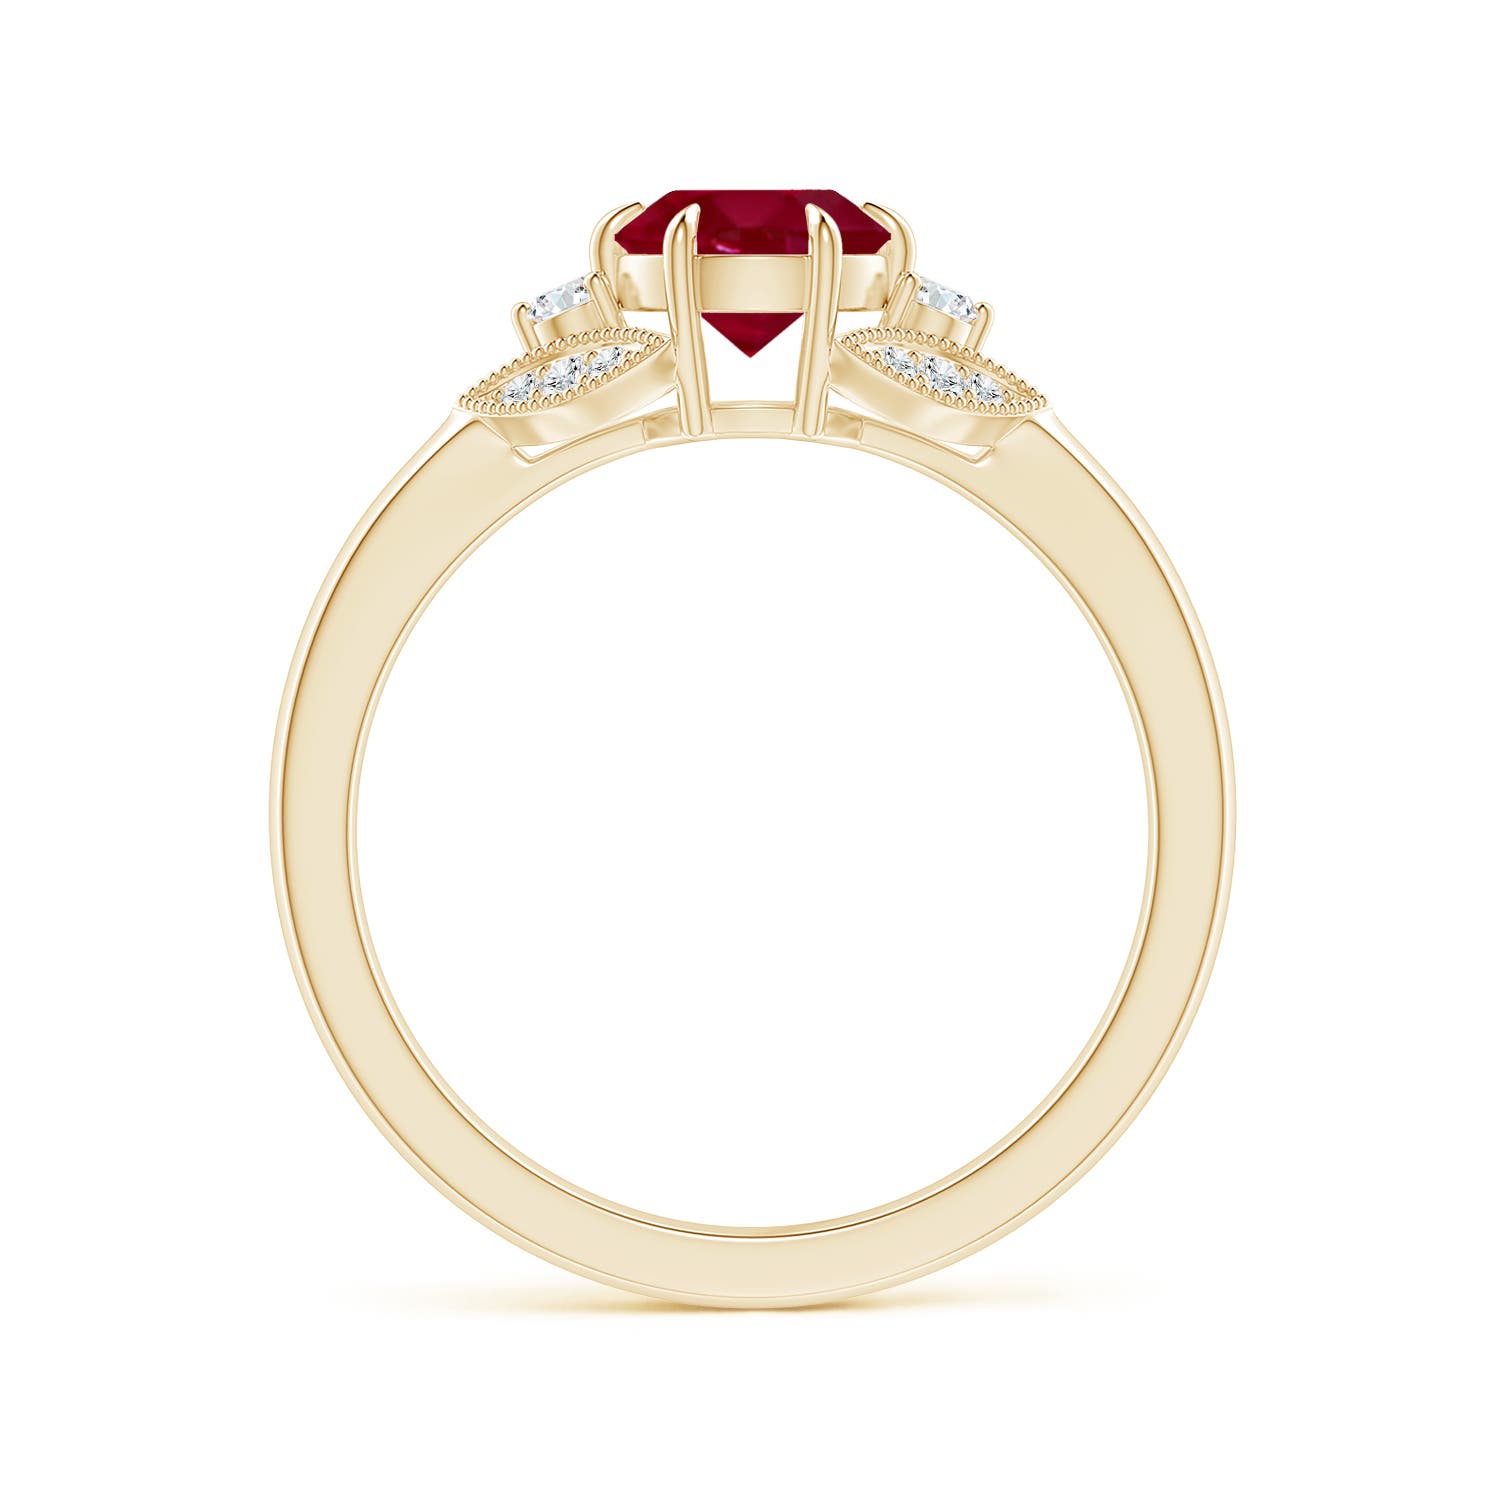 AA - Ruby / 1.1 CT / 14 KT Yellow Gold